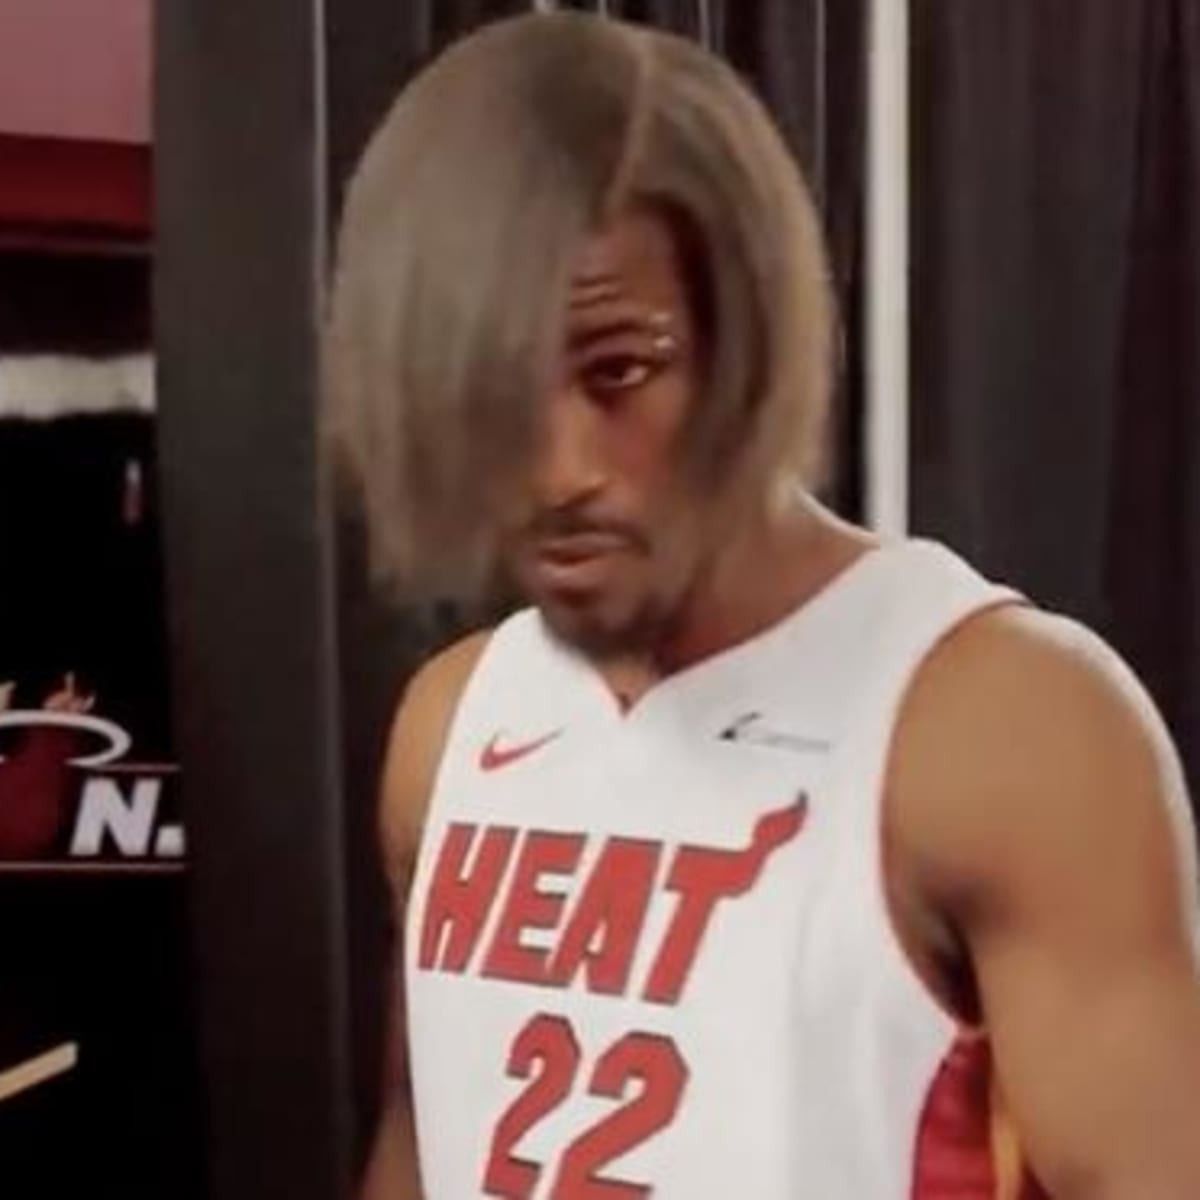 Jimmy Butler debuted a new look for Media Day — and his emo makeover i, Jimmy Butler